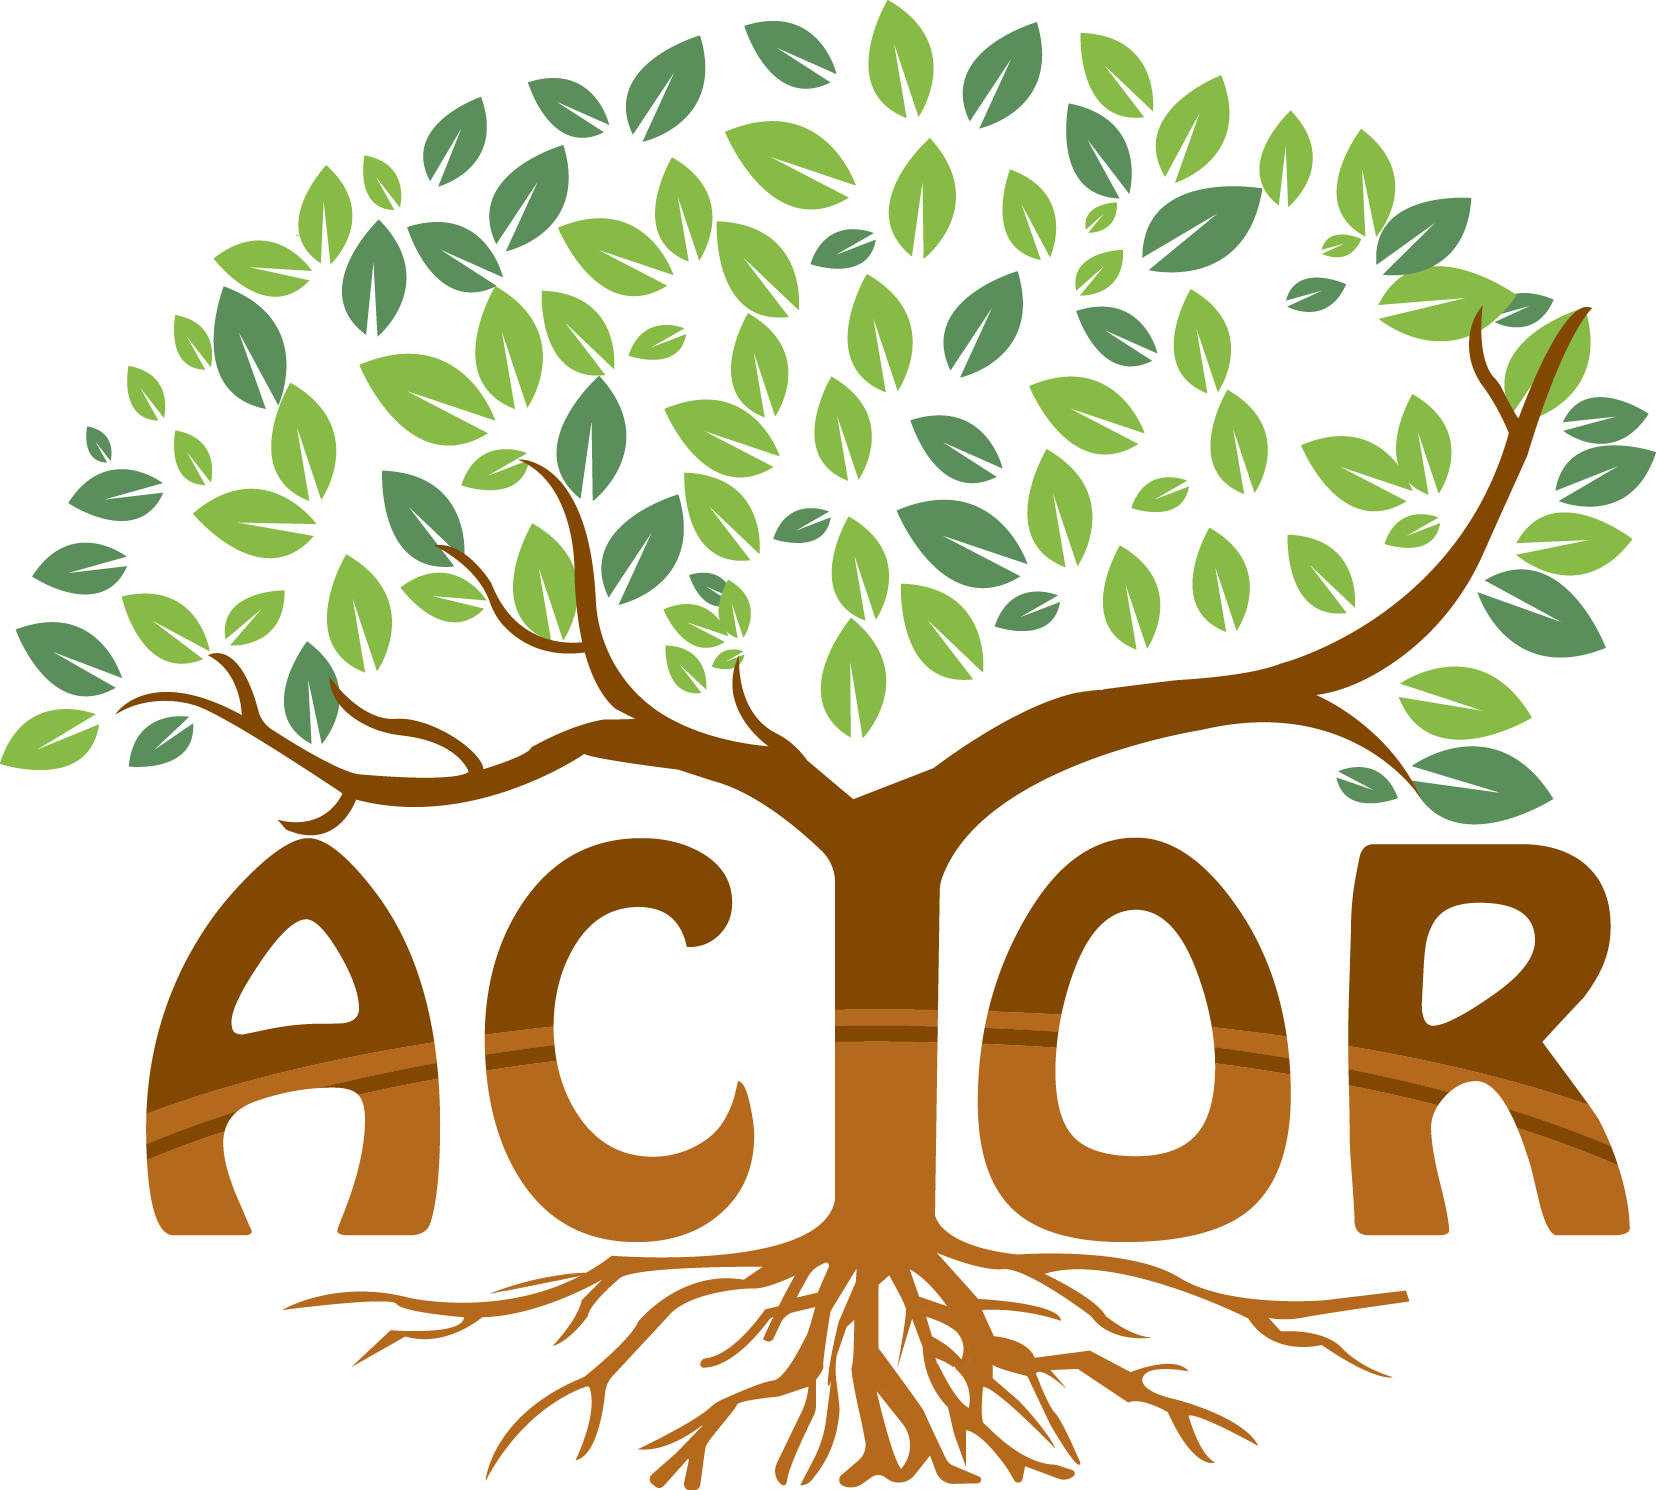 ACTOR - Act of Responsibility